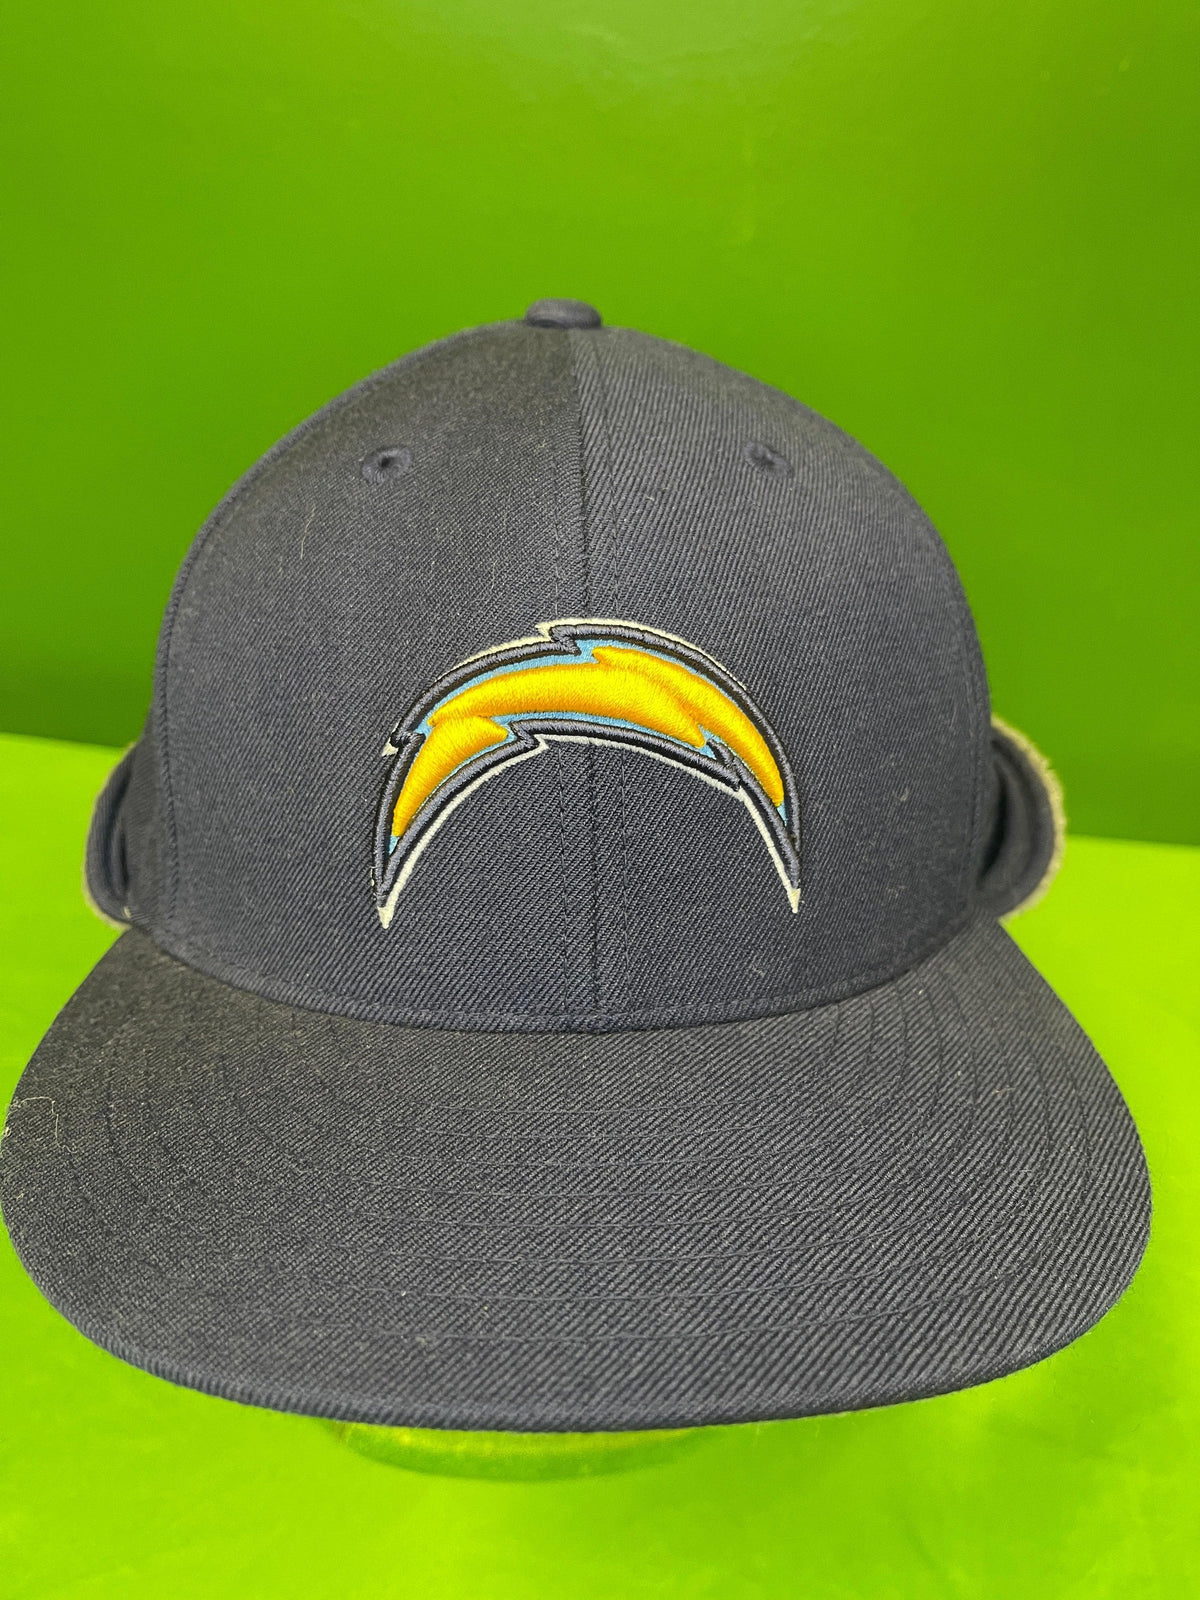 NFL Los Angeles Chargers Reebok Winter Flannel-Lined Cap/Hat Large/X-Large 7-5/8